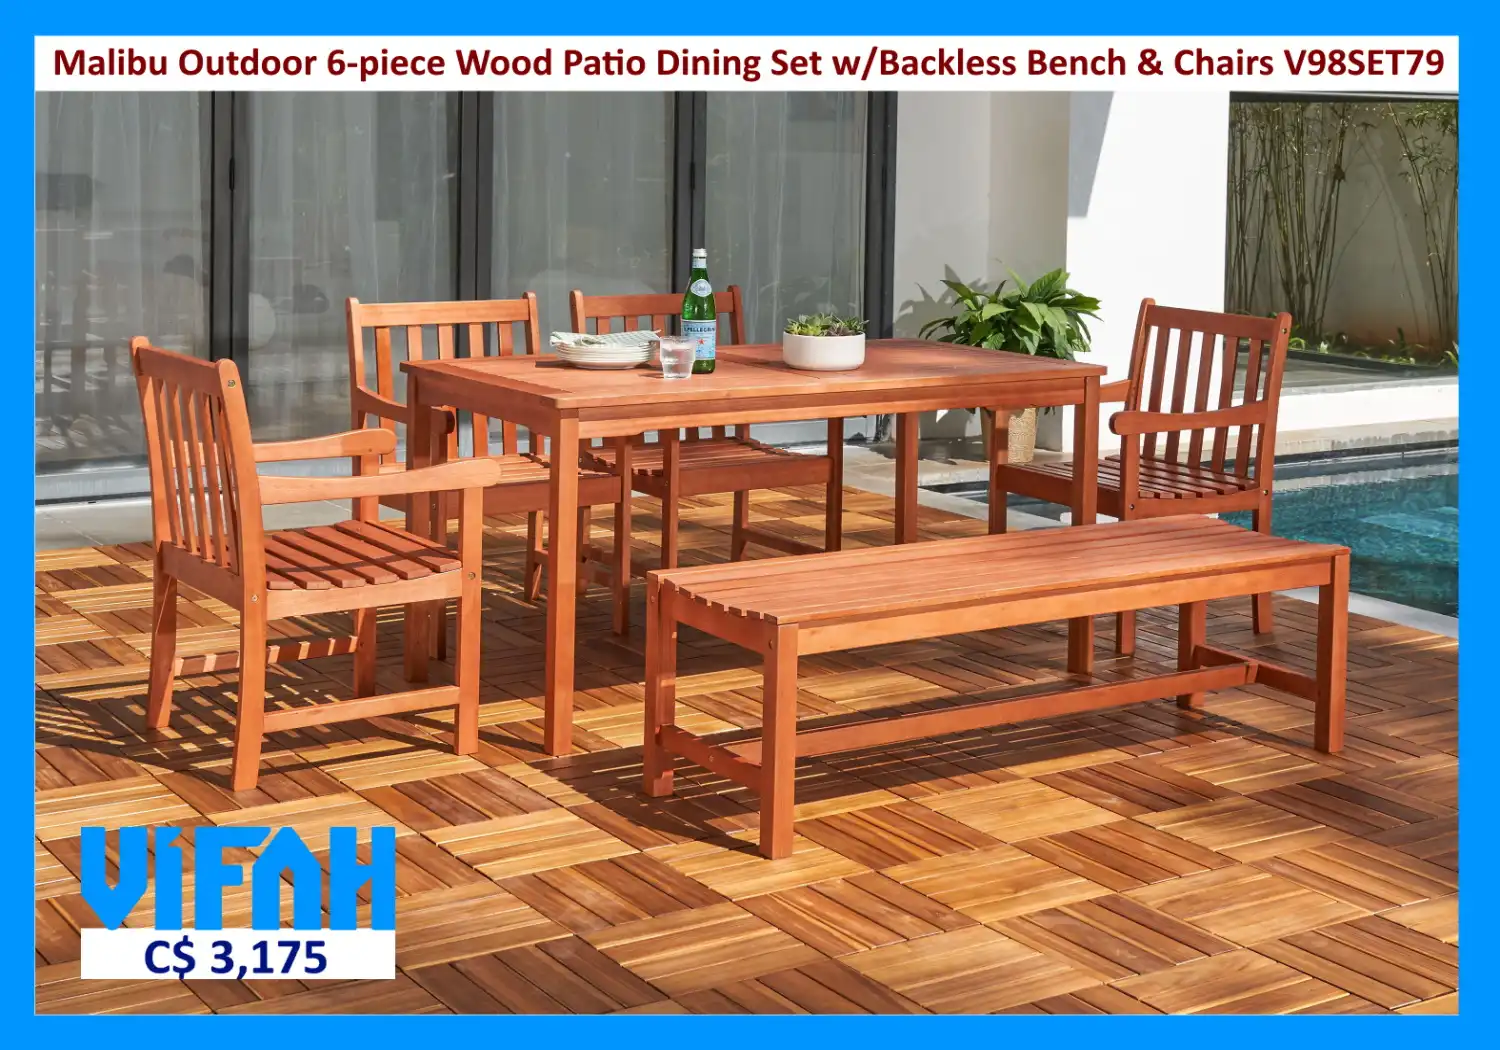 MALIBU Outdoor #V98SET79 6-piece Wood Patio Dining Set with Backless Bench and Chairs